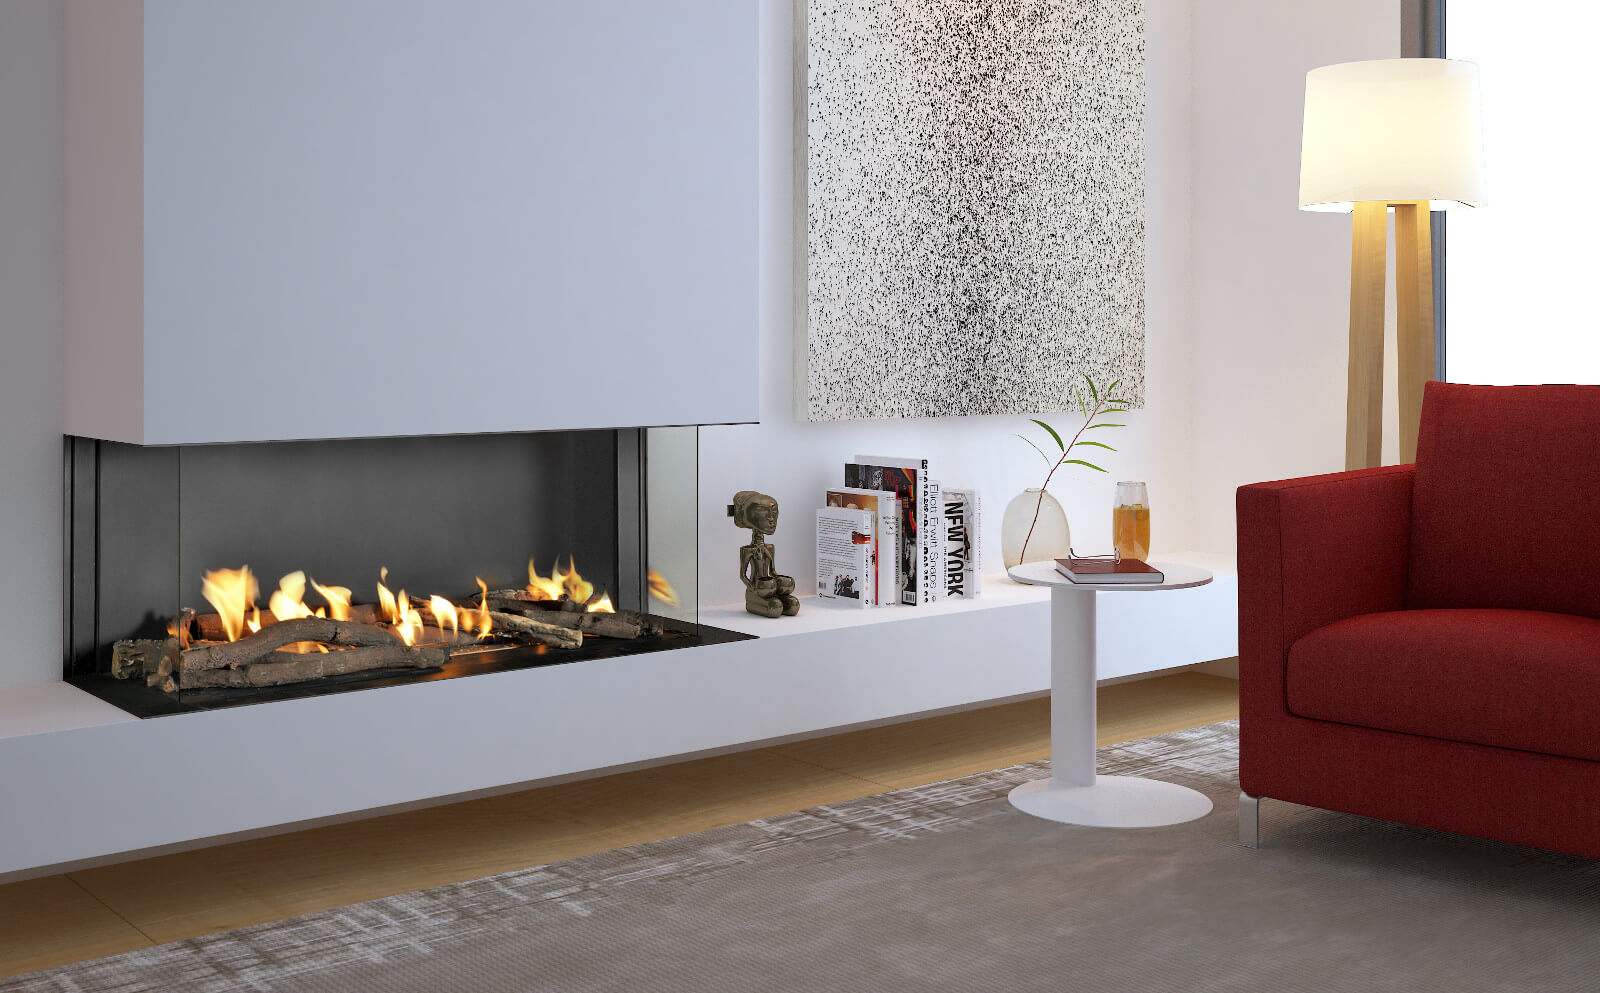 Flare Frameless Fireplaces - Friendly FiresFriendly Fires